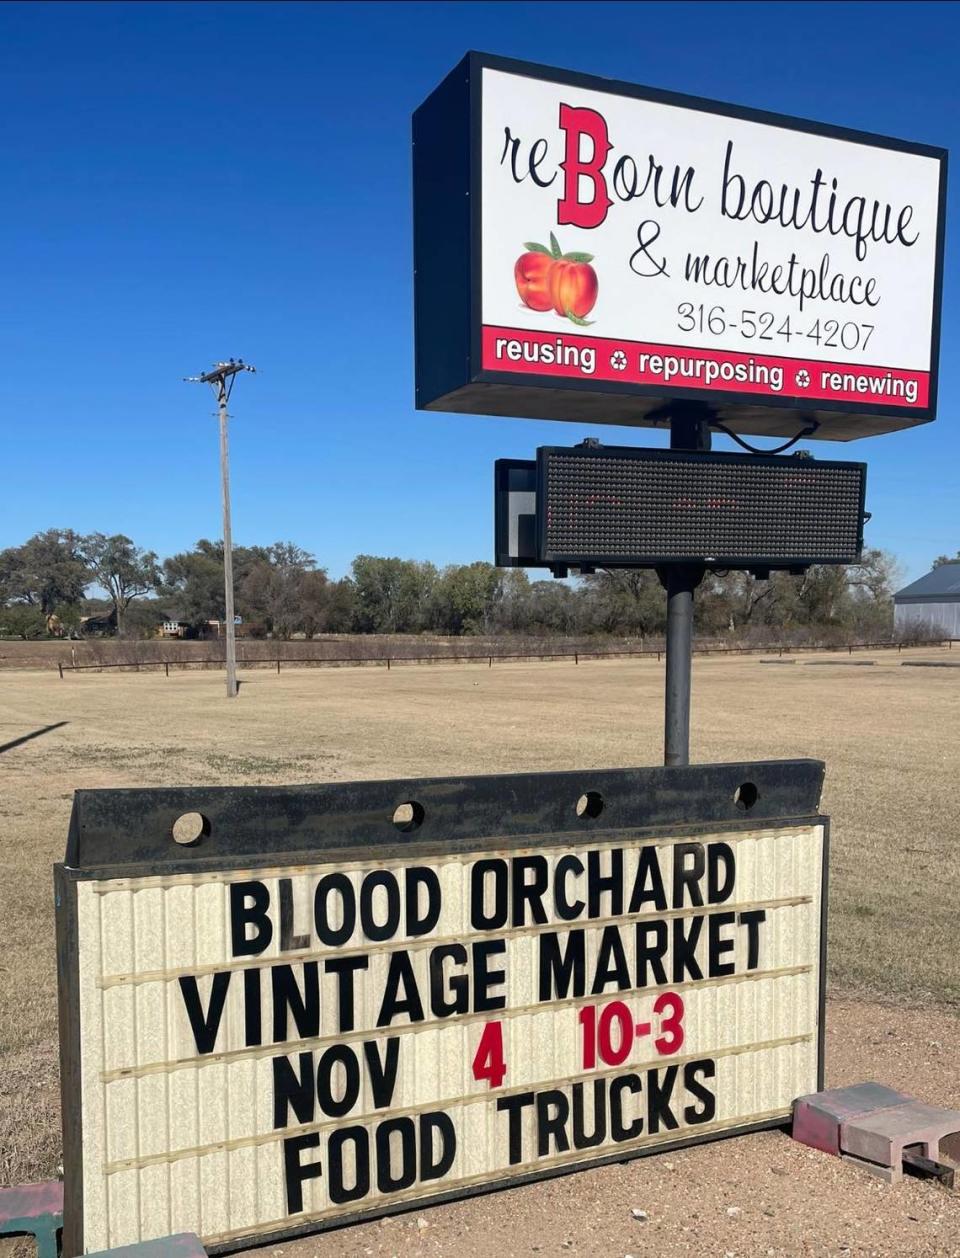 Jeff and Jessica Blood have been putting on a monthly vintage market at their family orchard since 2017.